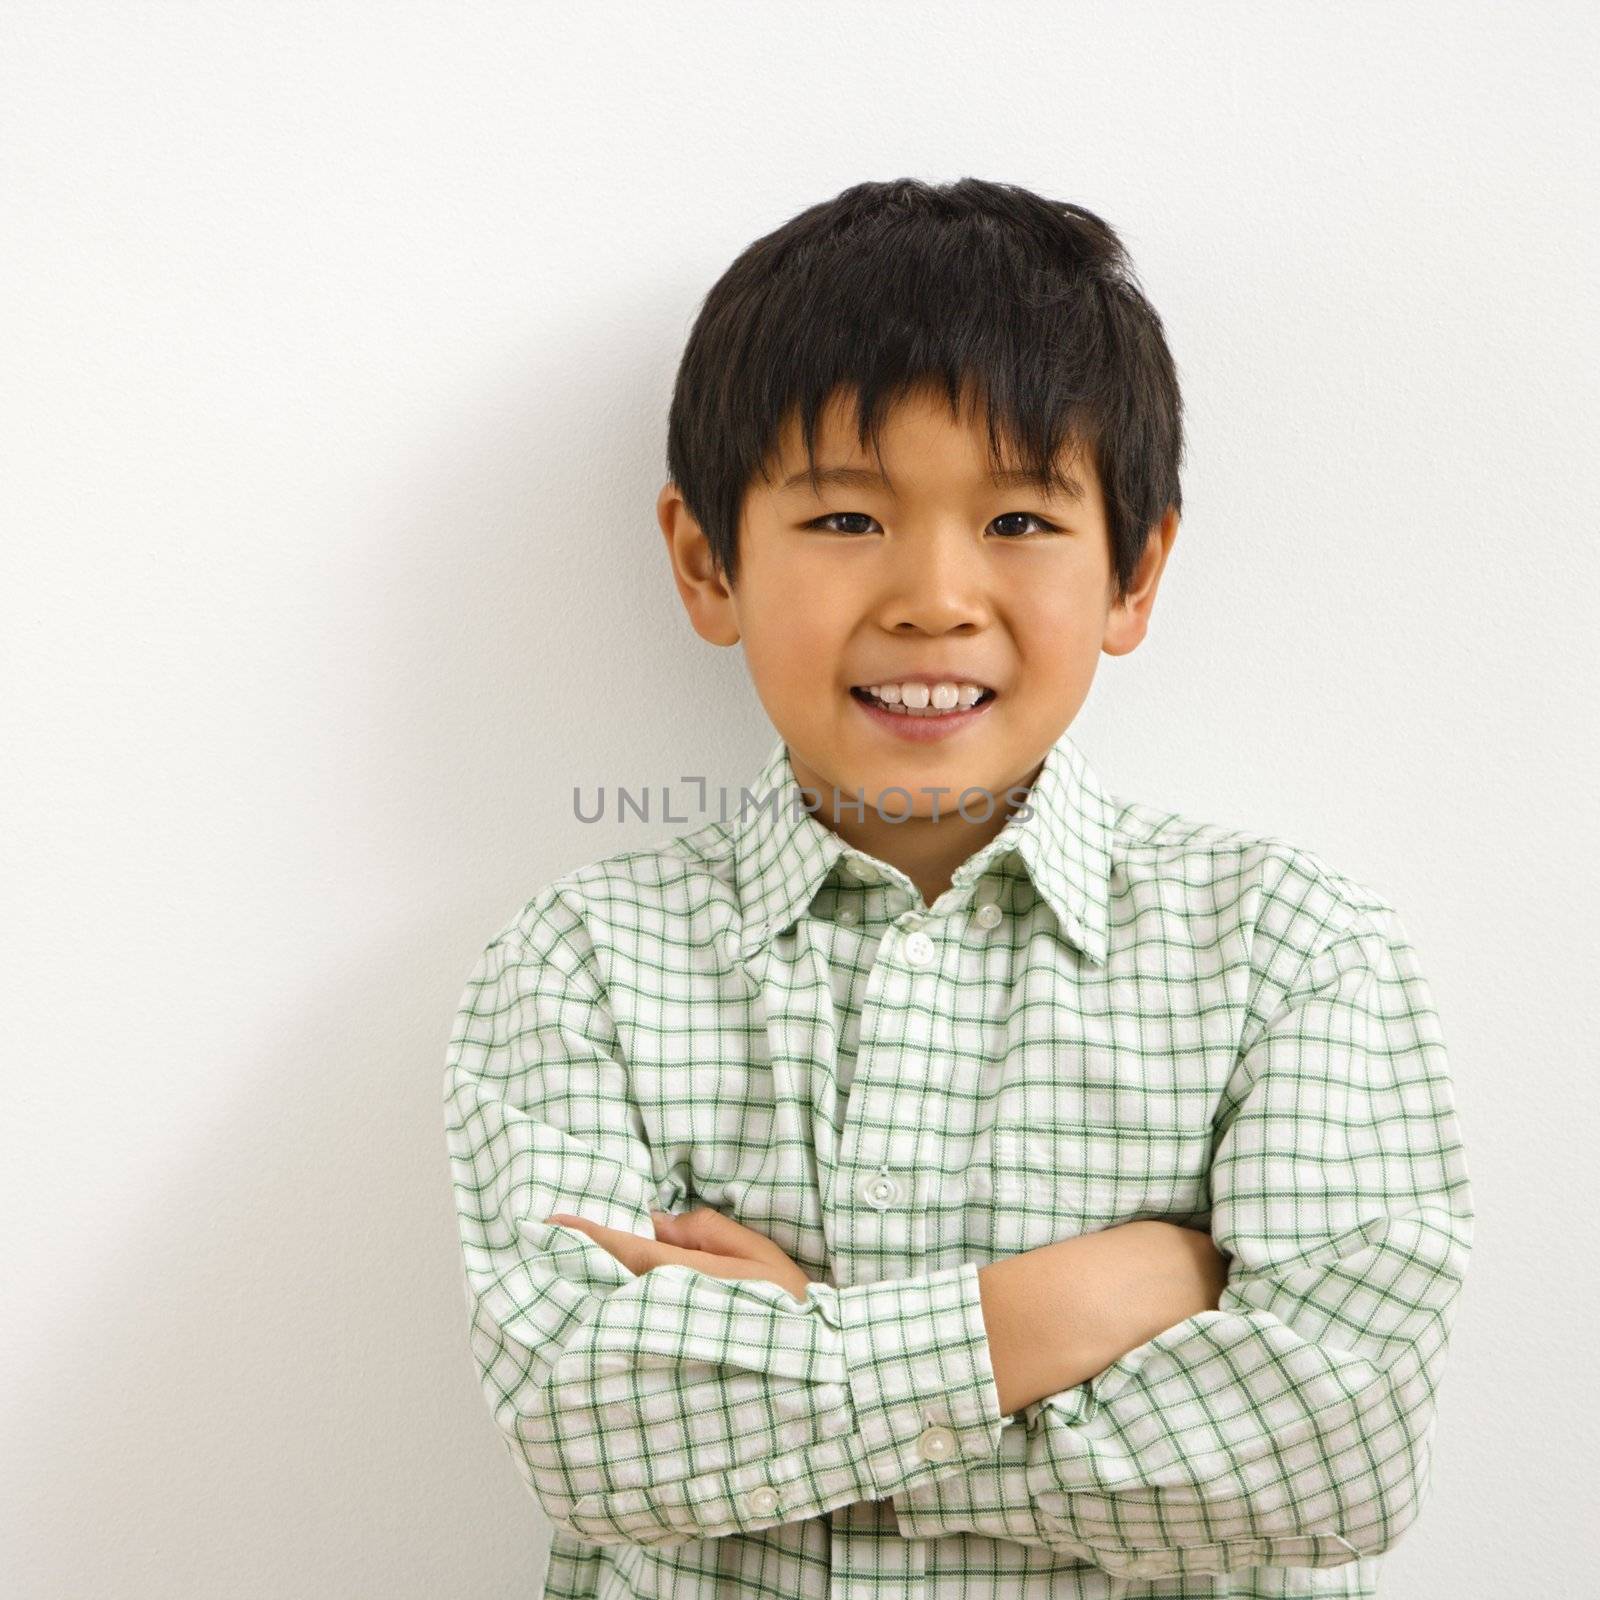 Portrait of young Asian boy smiling.